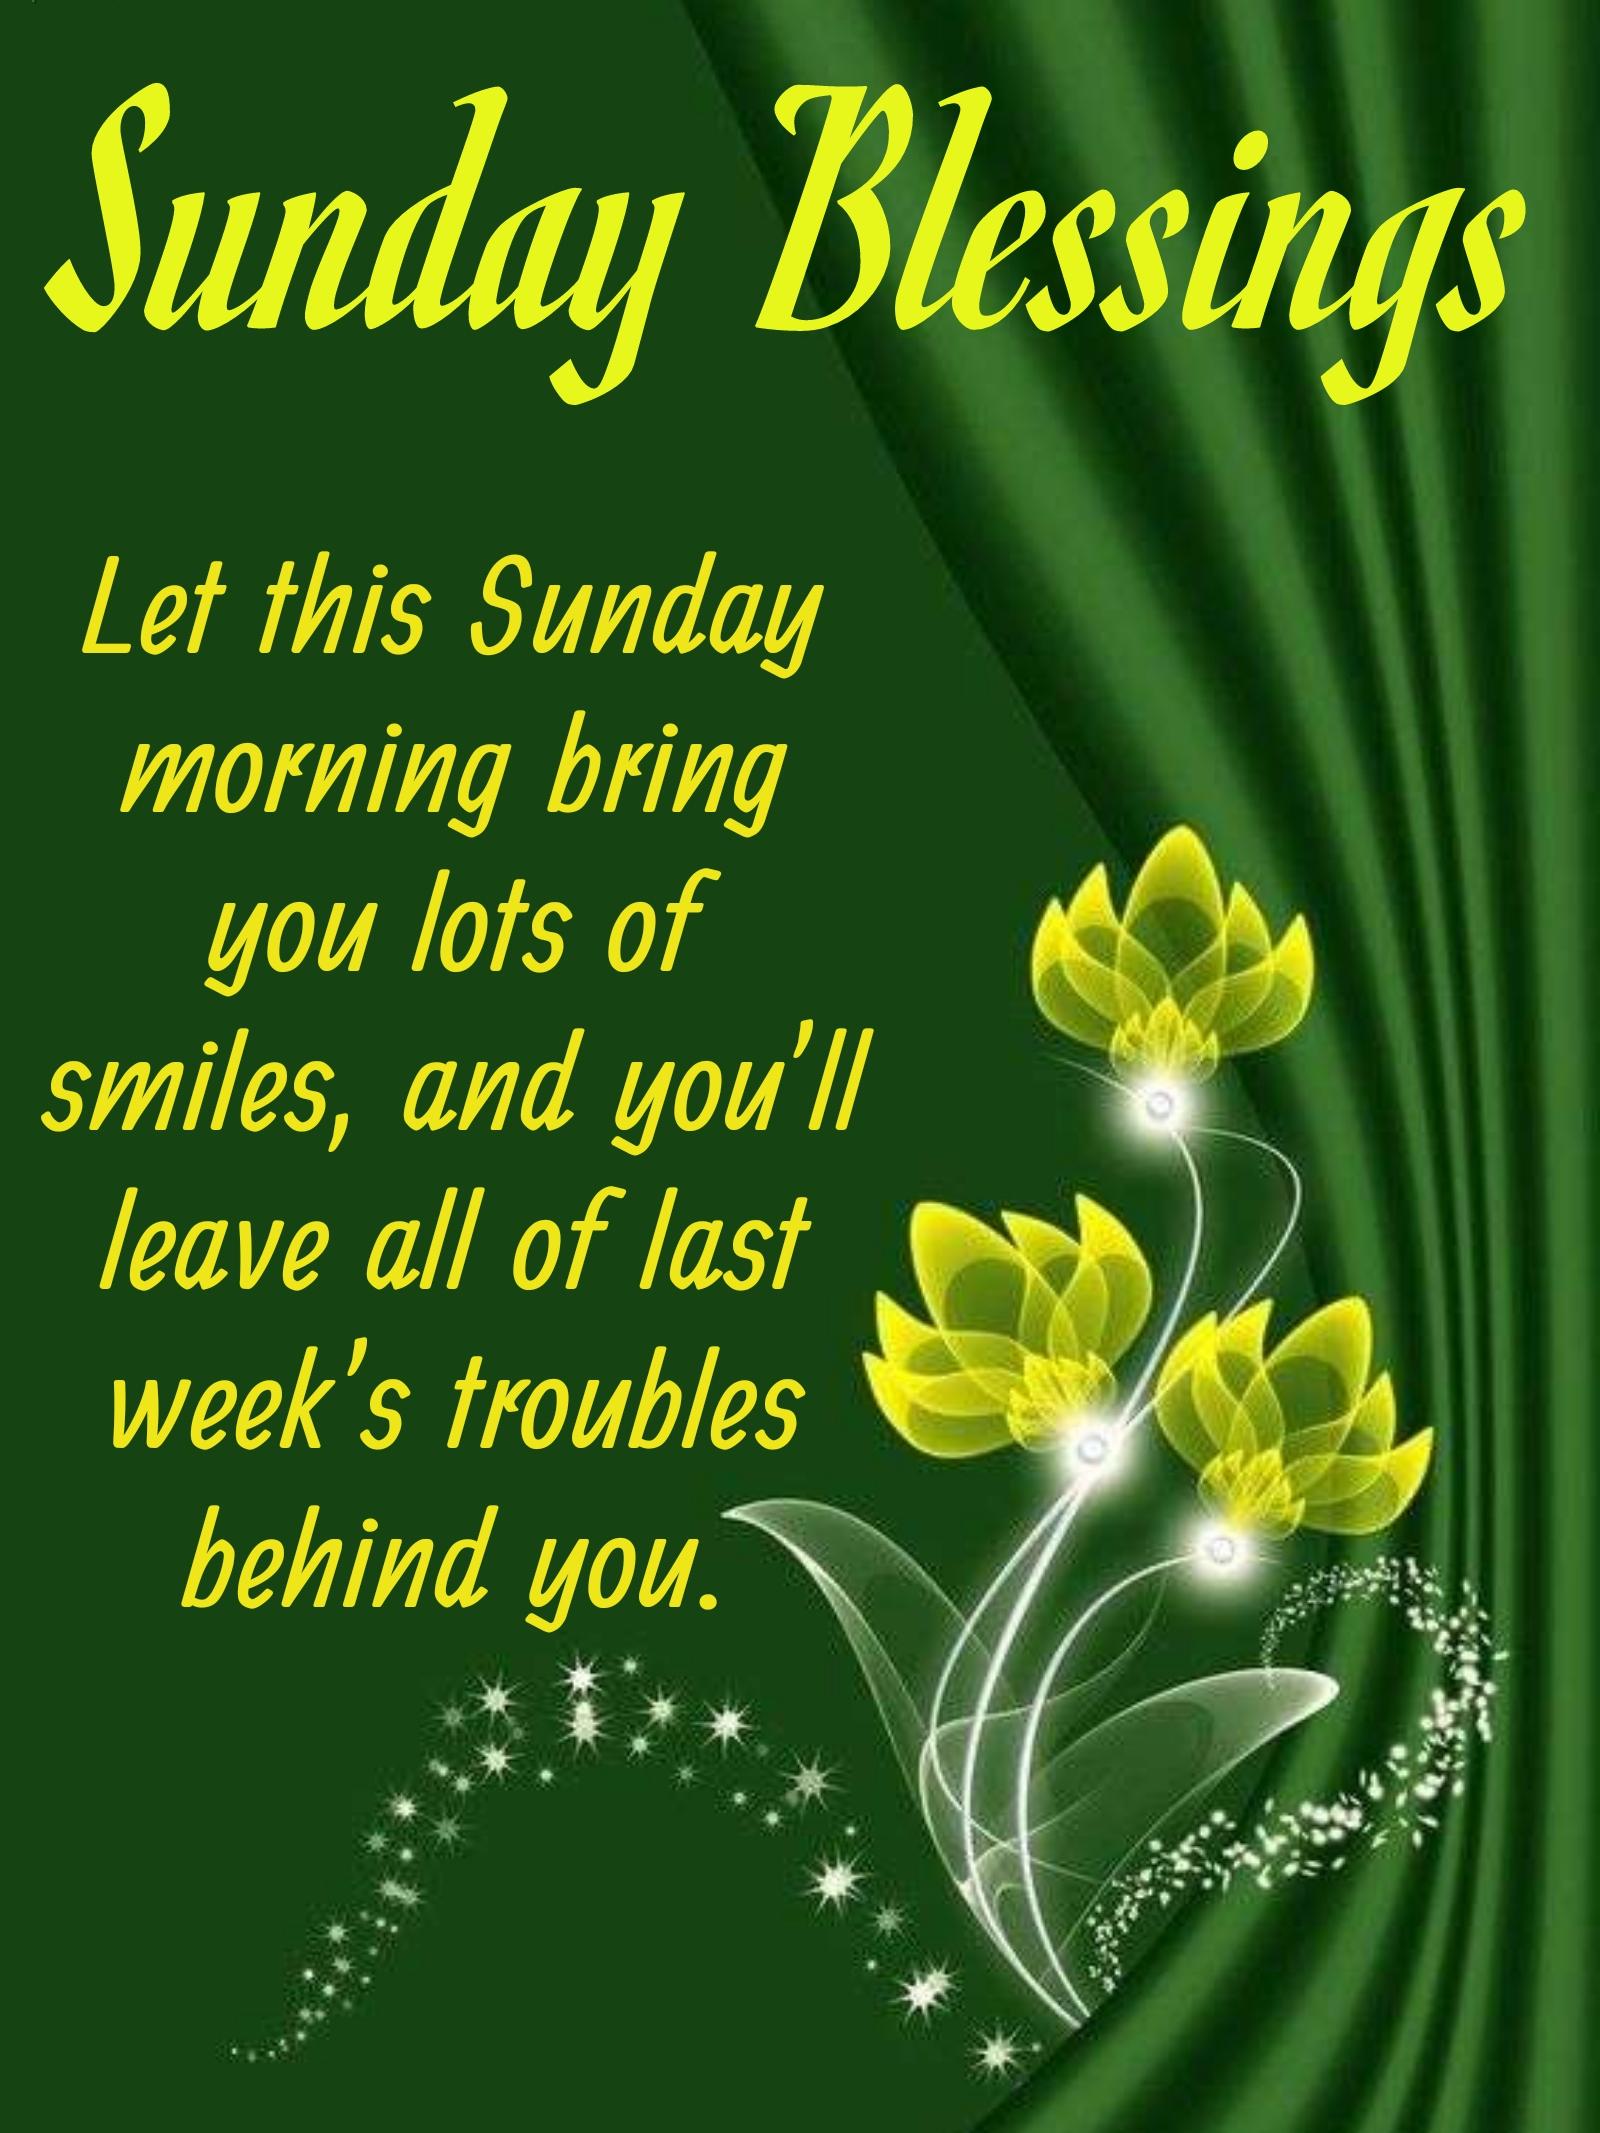 Let this Sunday morning bring you lots of smiles